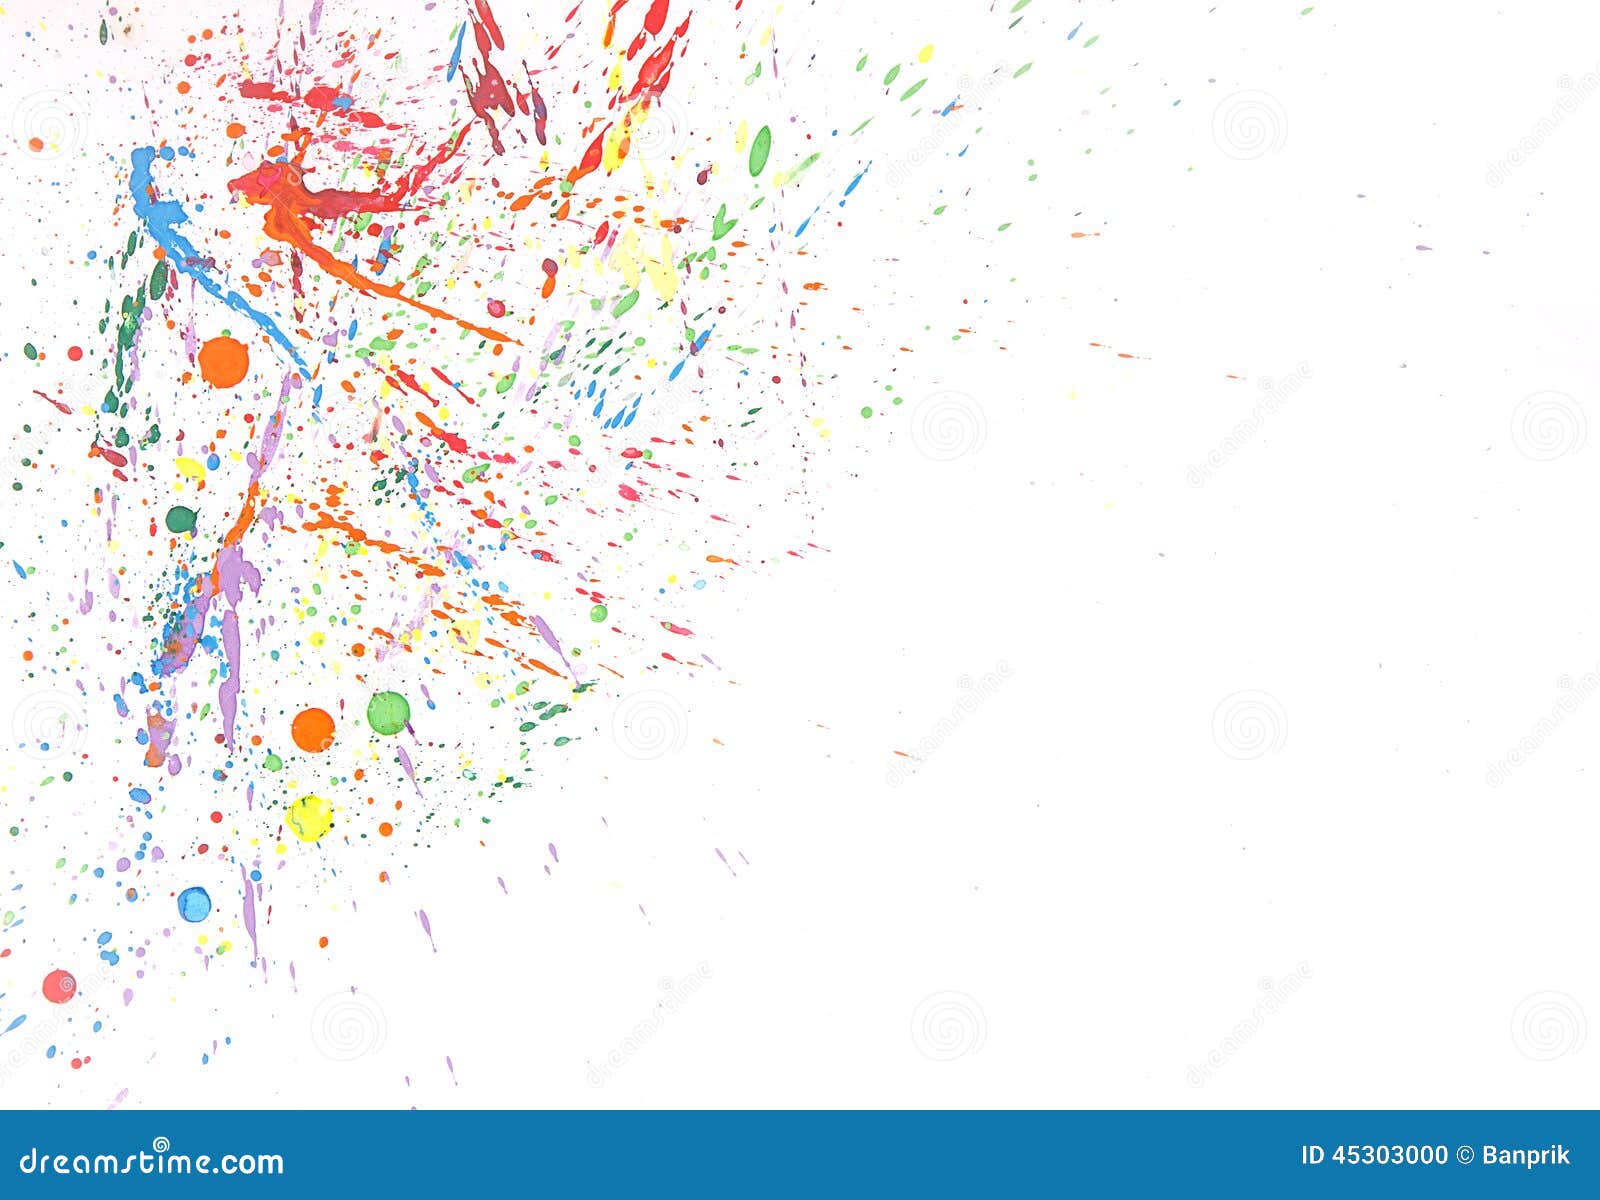 Colorful Water Color Splash on White Background Stock Photo - Image of  water, design: 45303000